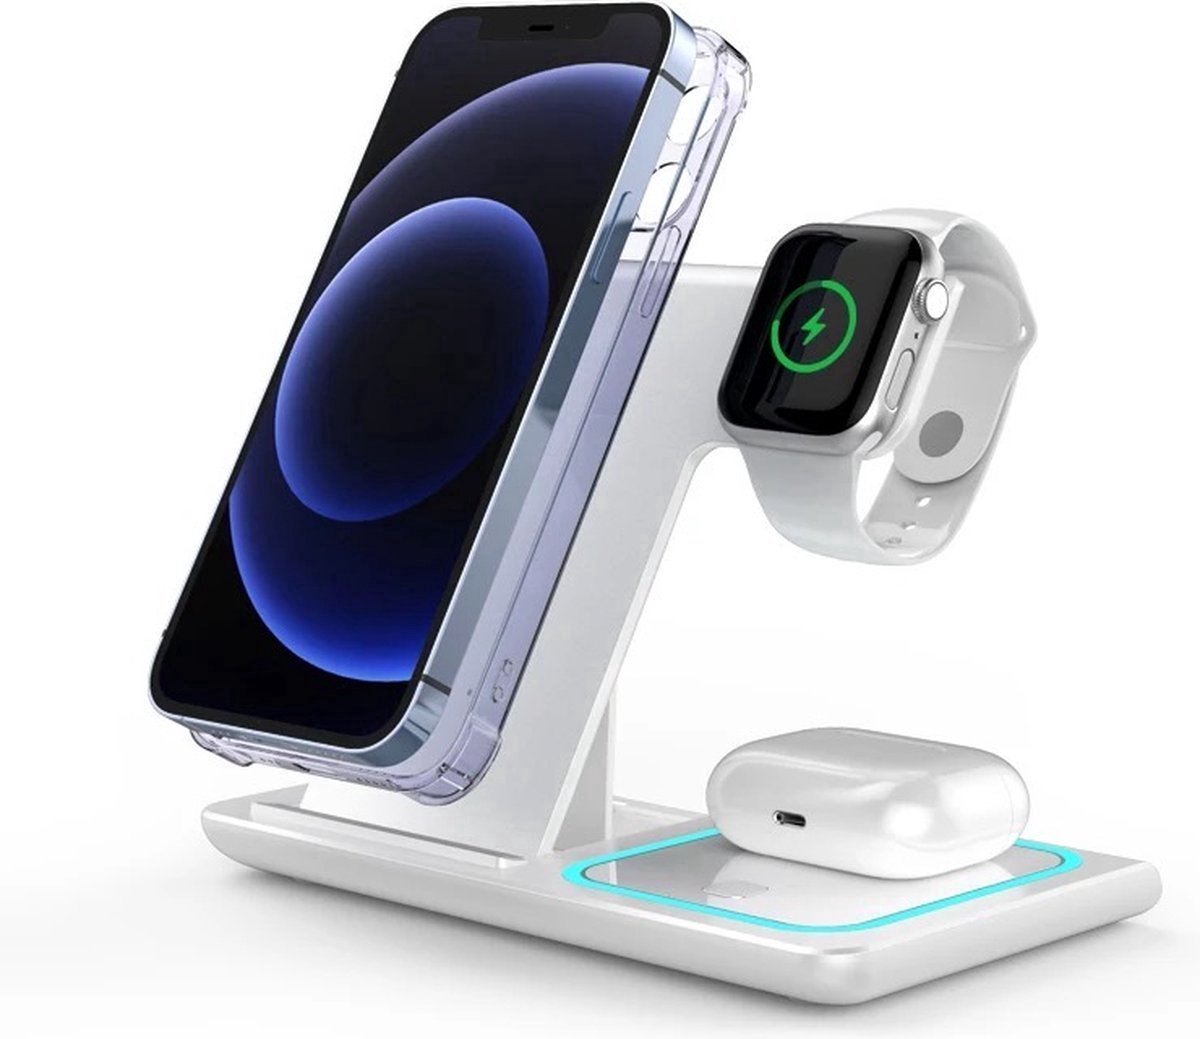 ForDig 3-in-1 Draadloze Oplader (Wit) Docking Station - 15 Watt Snellader - Geschikt voor iPhone & Android Telefoon / Apple iWatch & Airpods / Samsung Galaxy Buds - Draadloos GSM QI Lader - Wireless Charger - ForDig